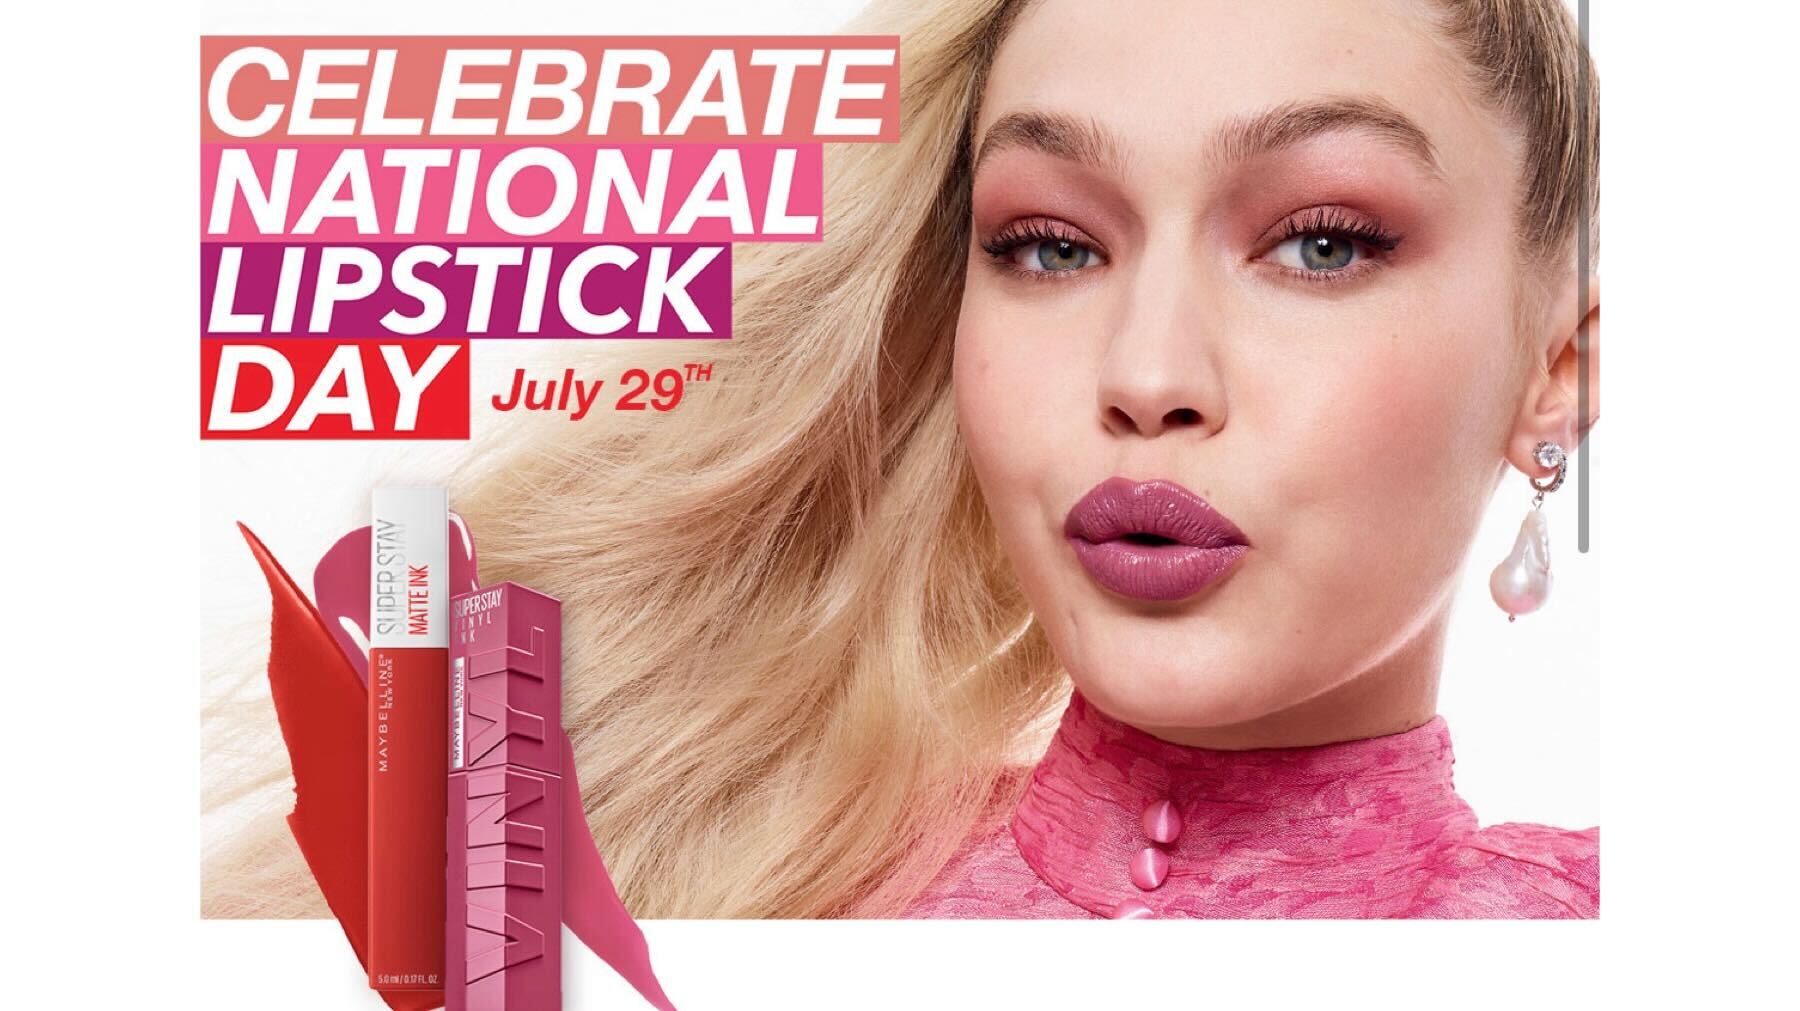 Celebrate National Lipstick Day July 29th With Maybelline 40,000